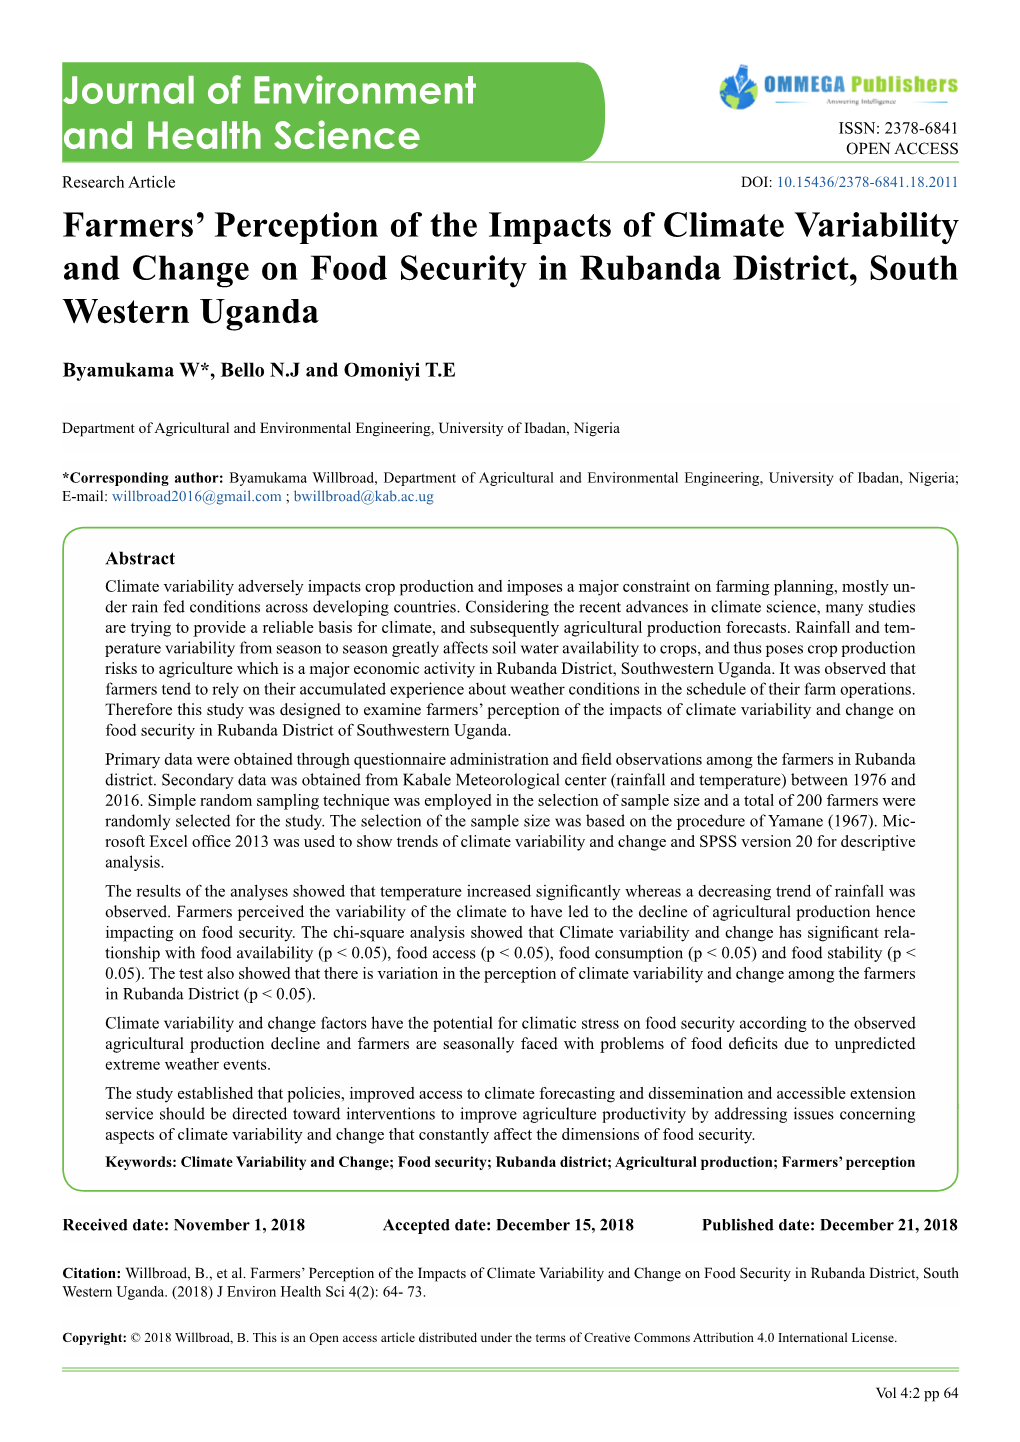 Farmers' Perception of the Impacts of Climate Variability and Change On